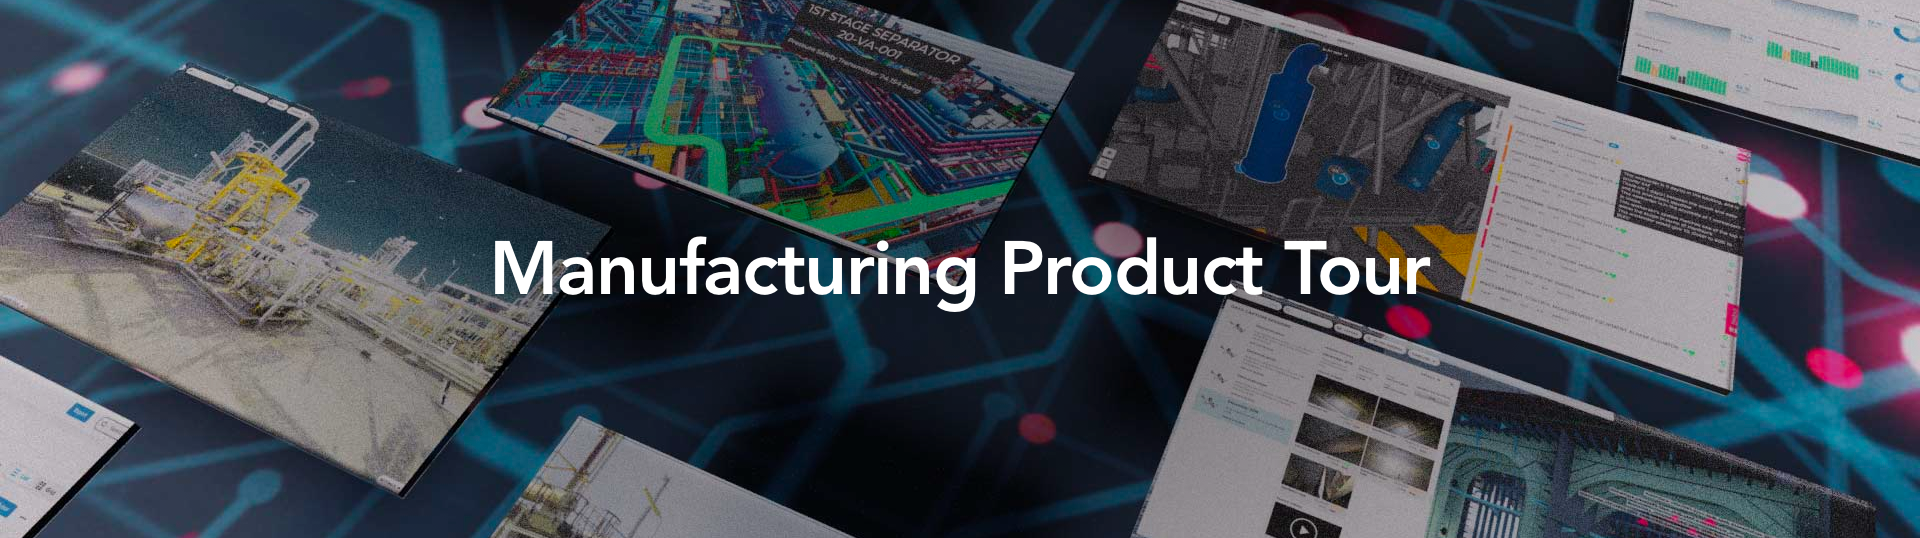 Manufacturing Product Tour-2